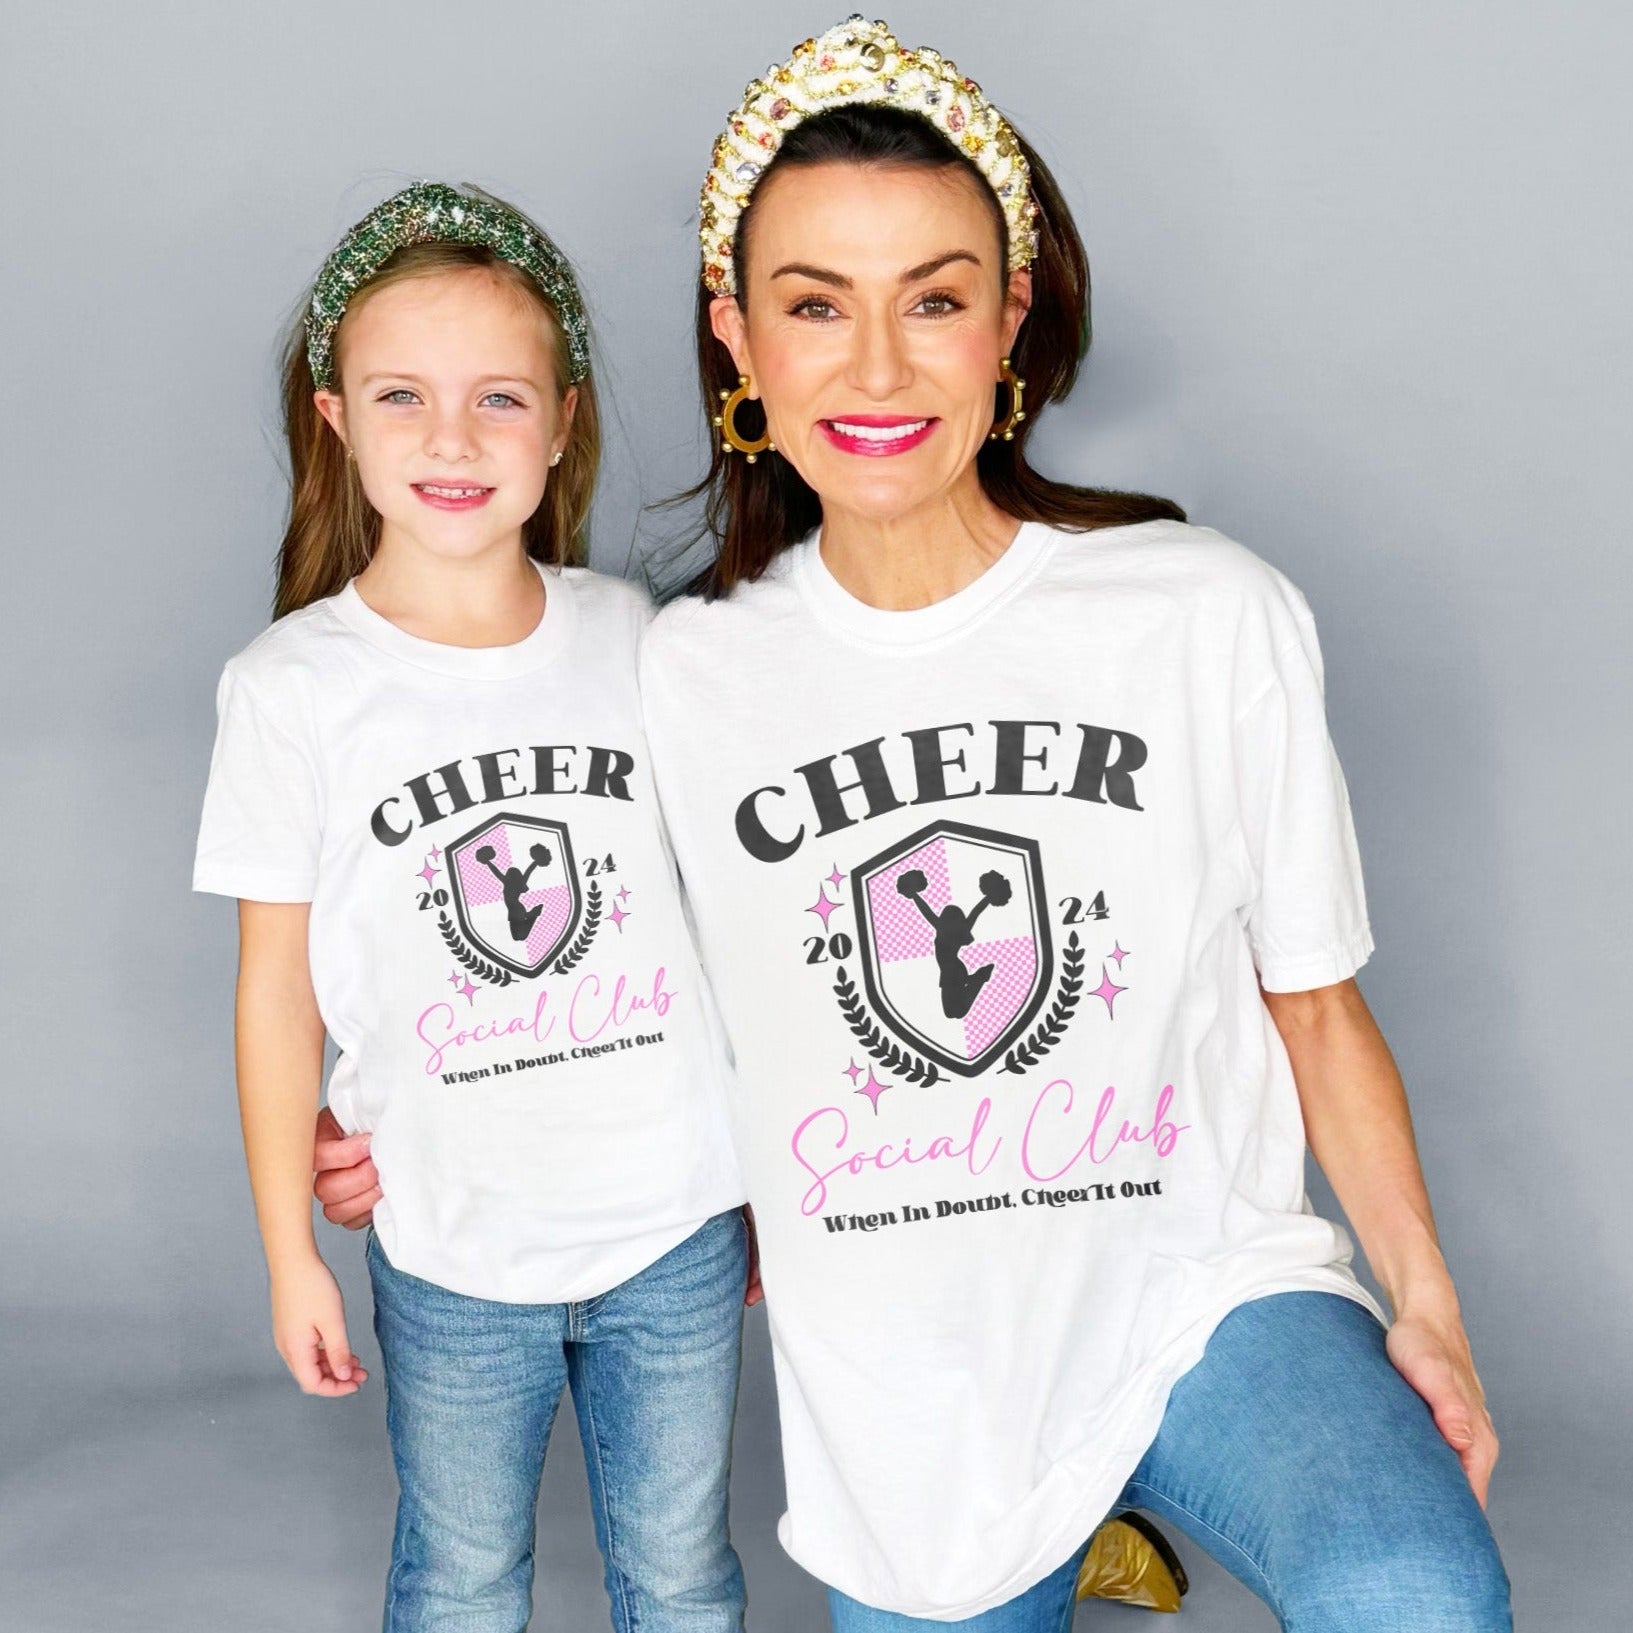 Cheer Social Club Youth and Adult Tee